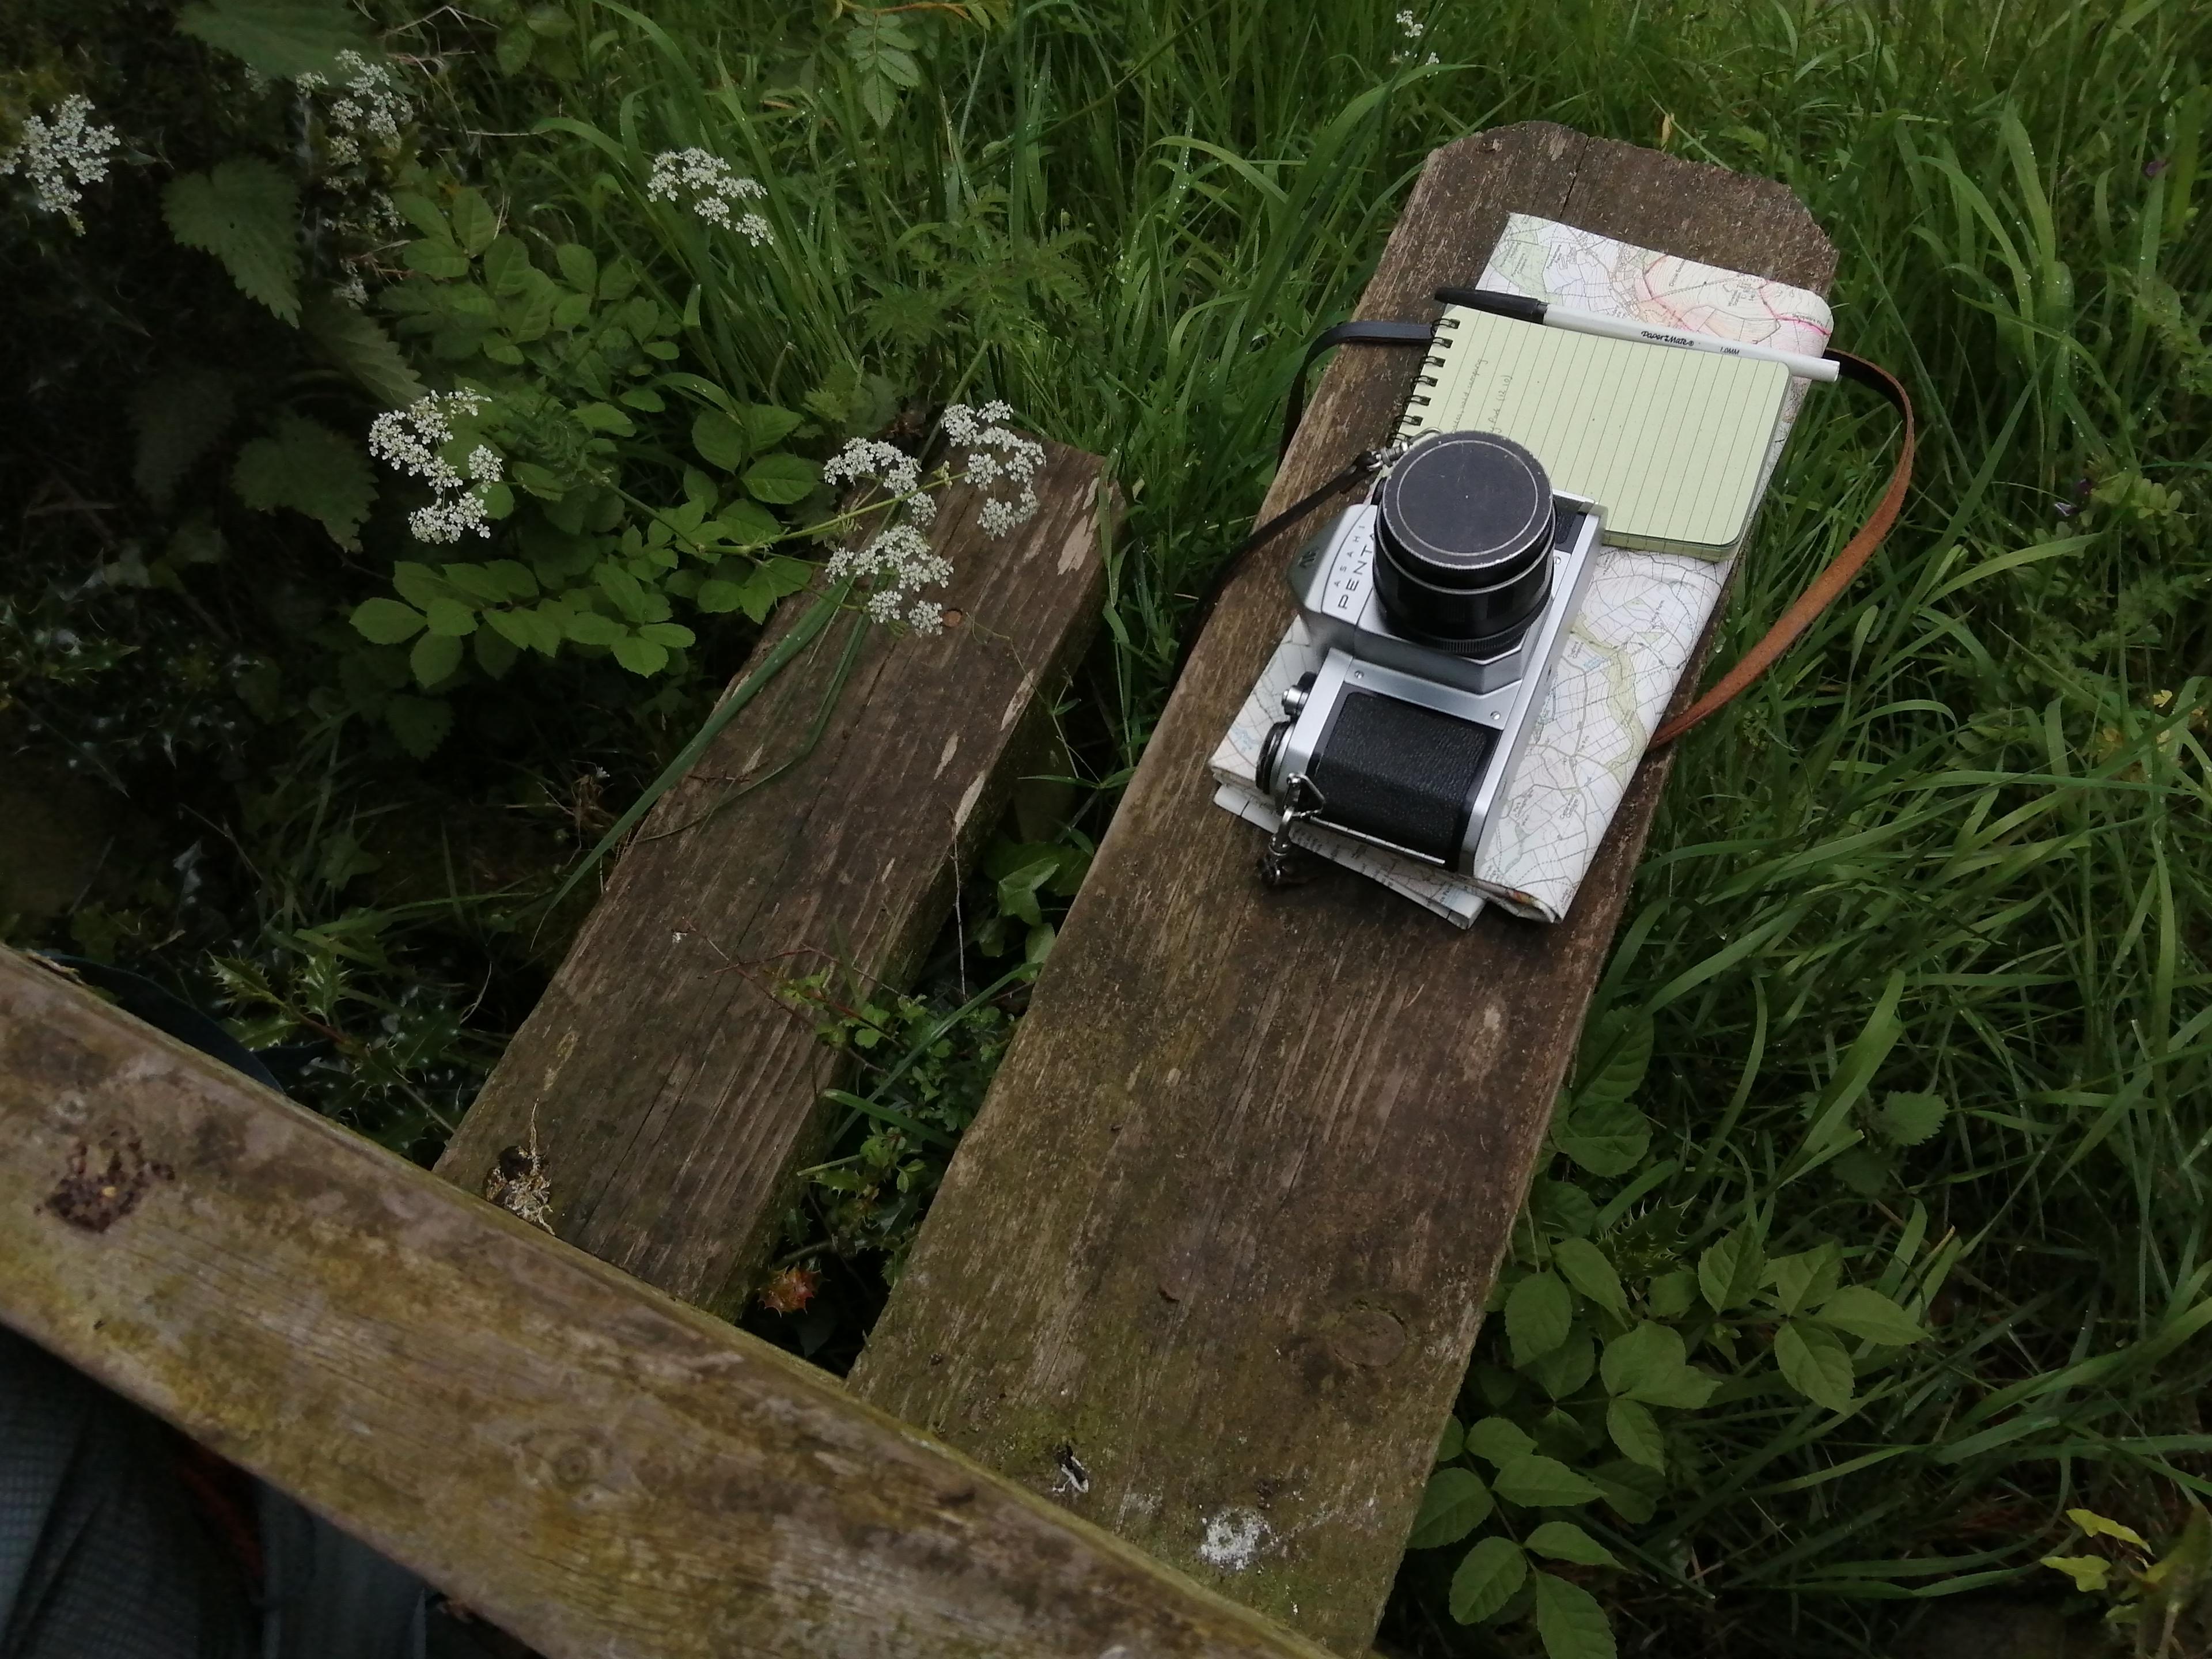 Camera, maps and notepad on a wooden stile